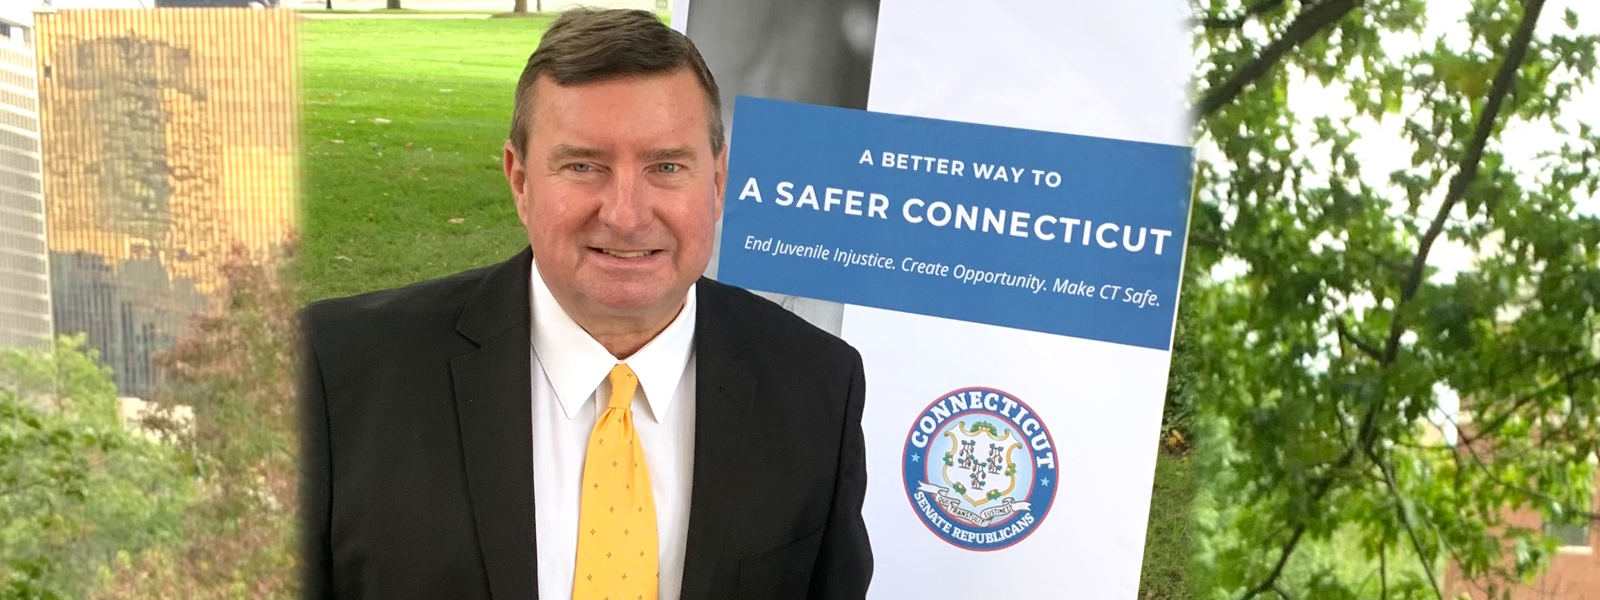 A Better Way to a Safer Connecticut: